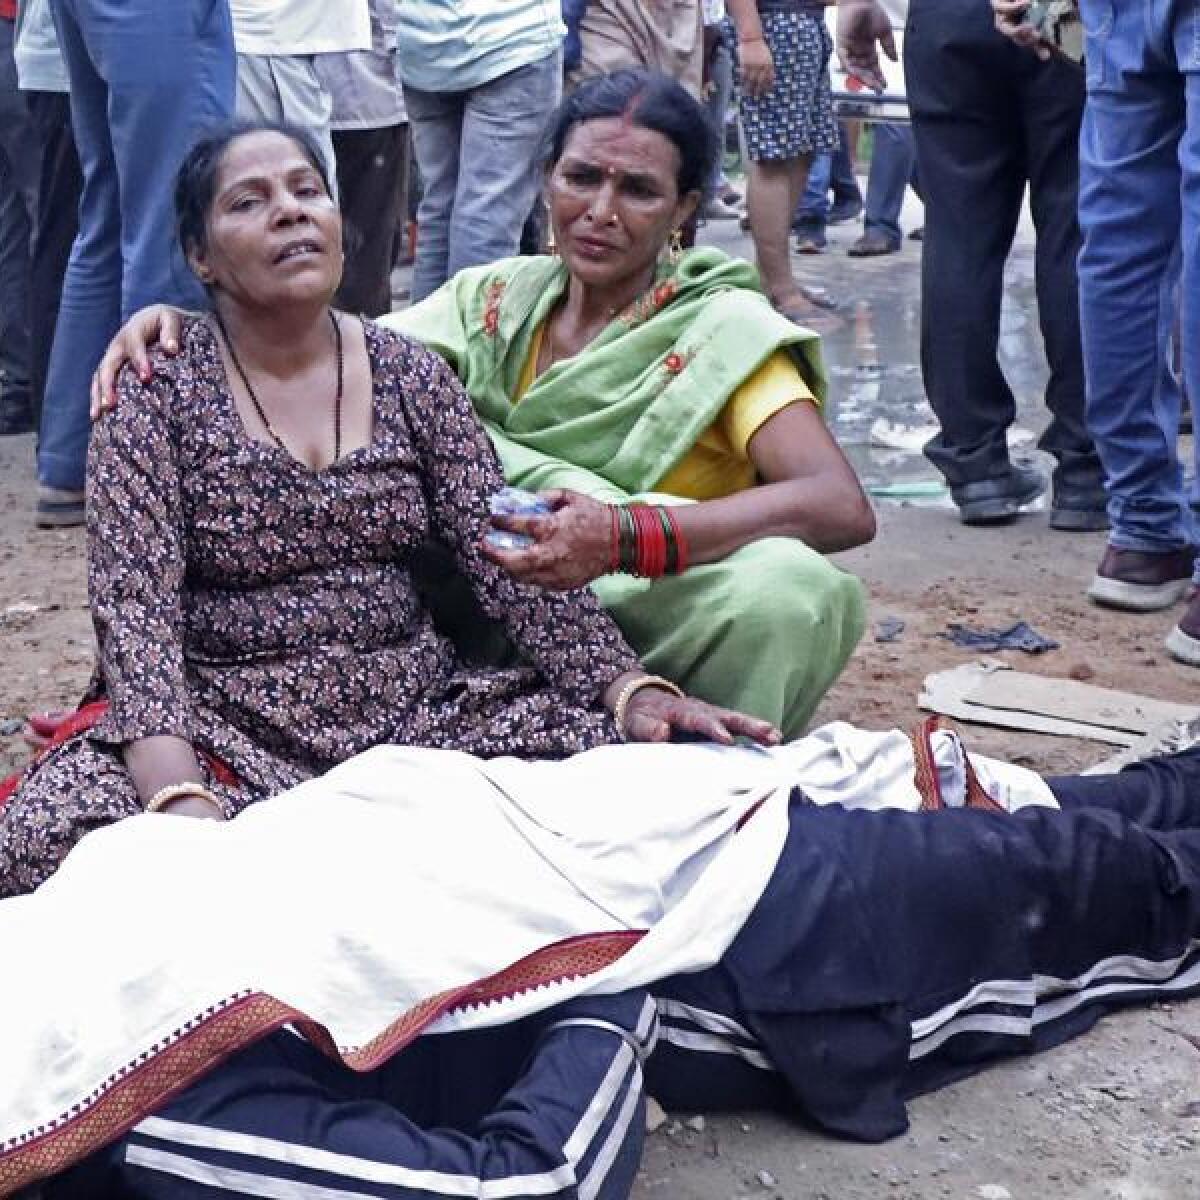 Women mourn next to the body of a relative in India